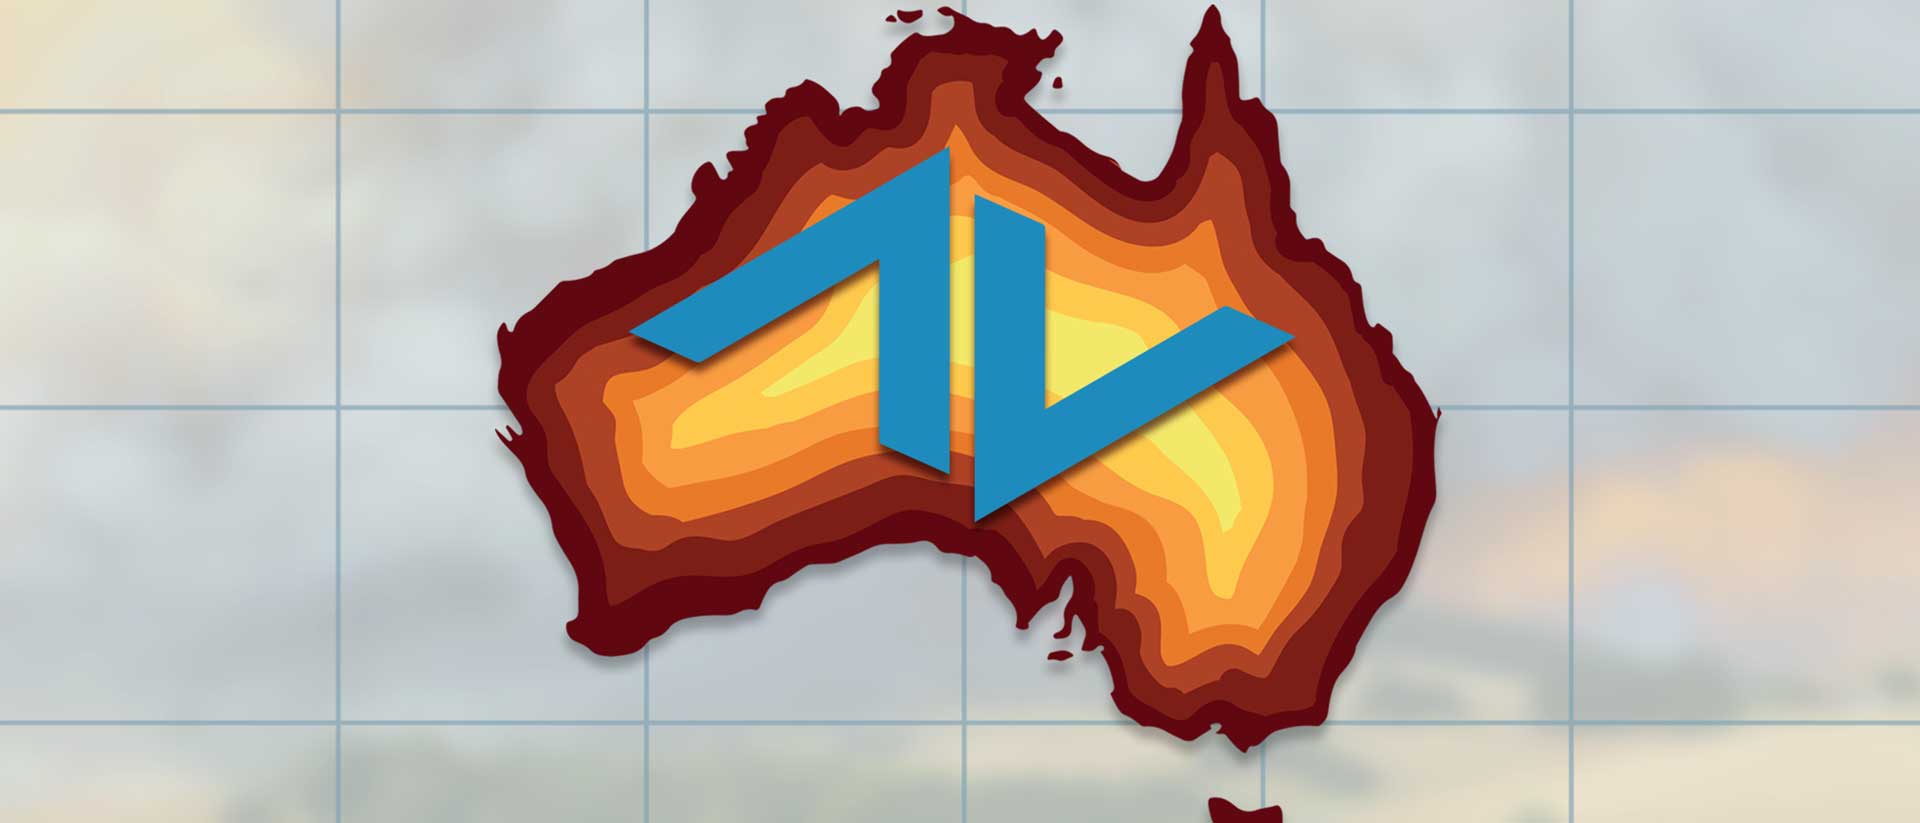 ActionVFX Fundraiser to Aid the Recovery in the Australian Fires